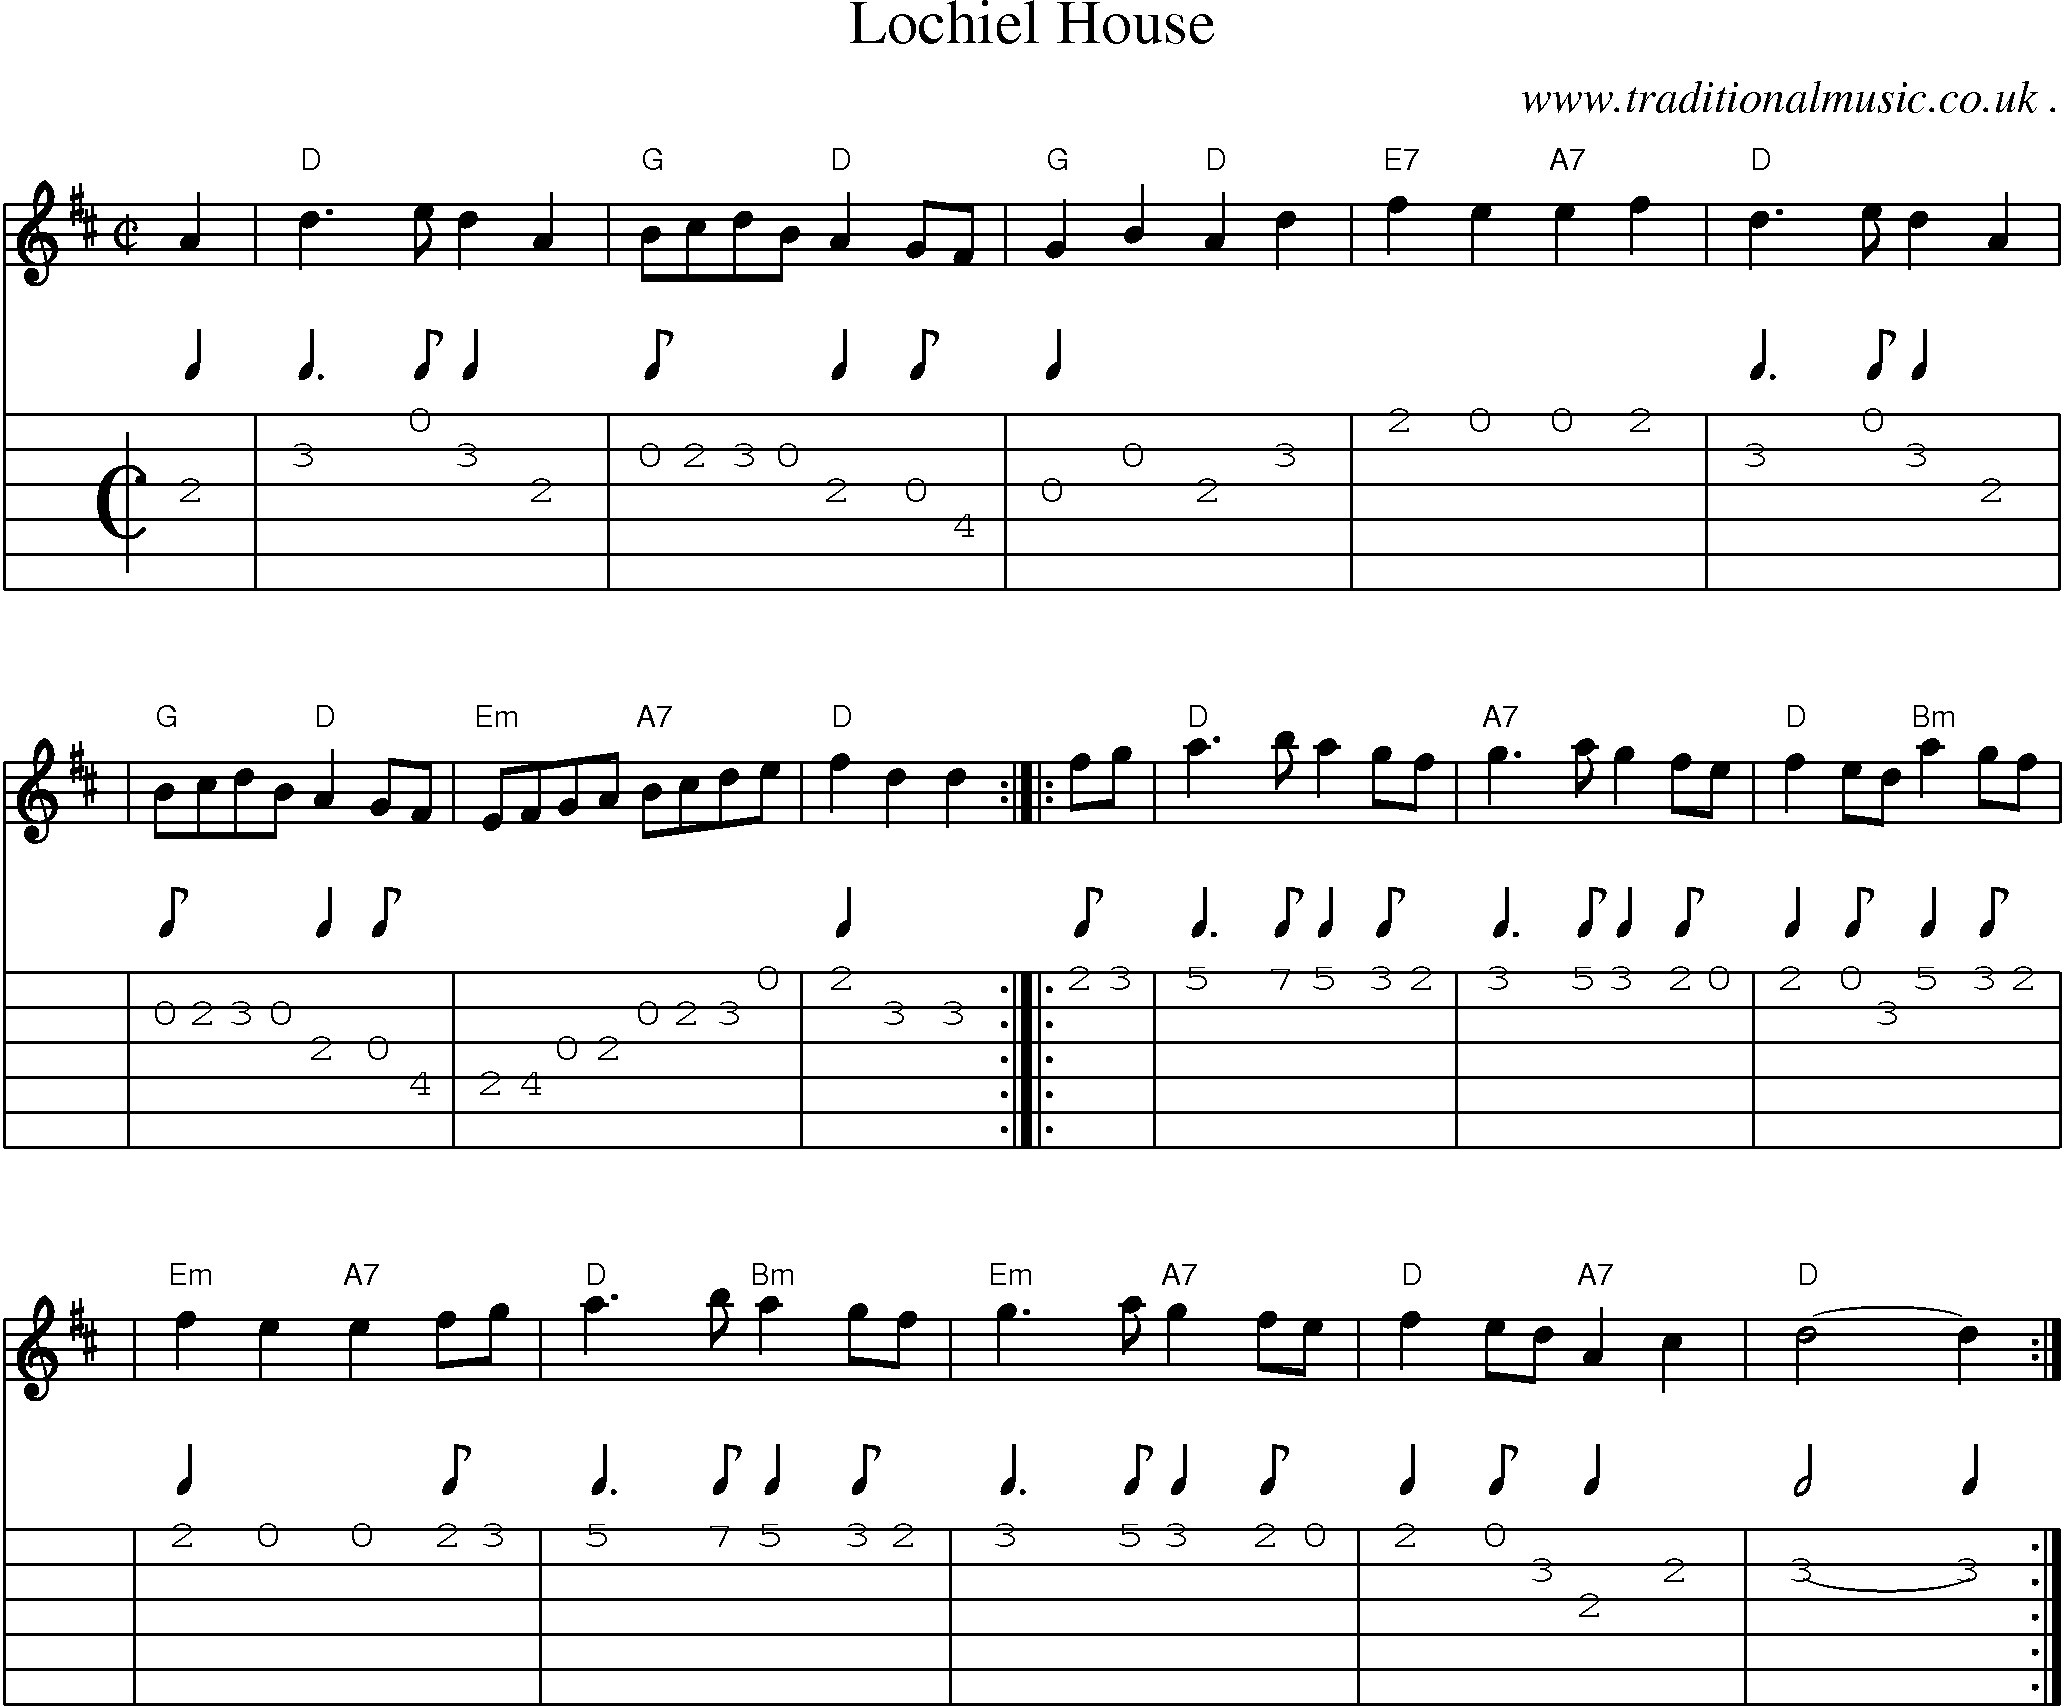 Sheet-music  score, Chords and Guitar Tabs for Lochiel House